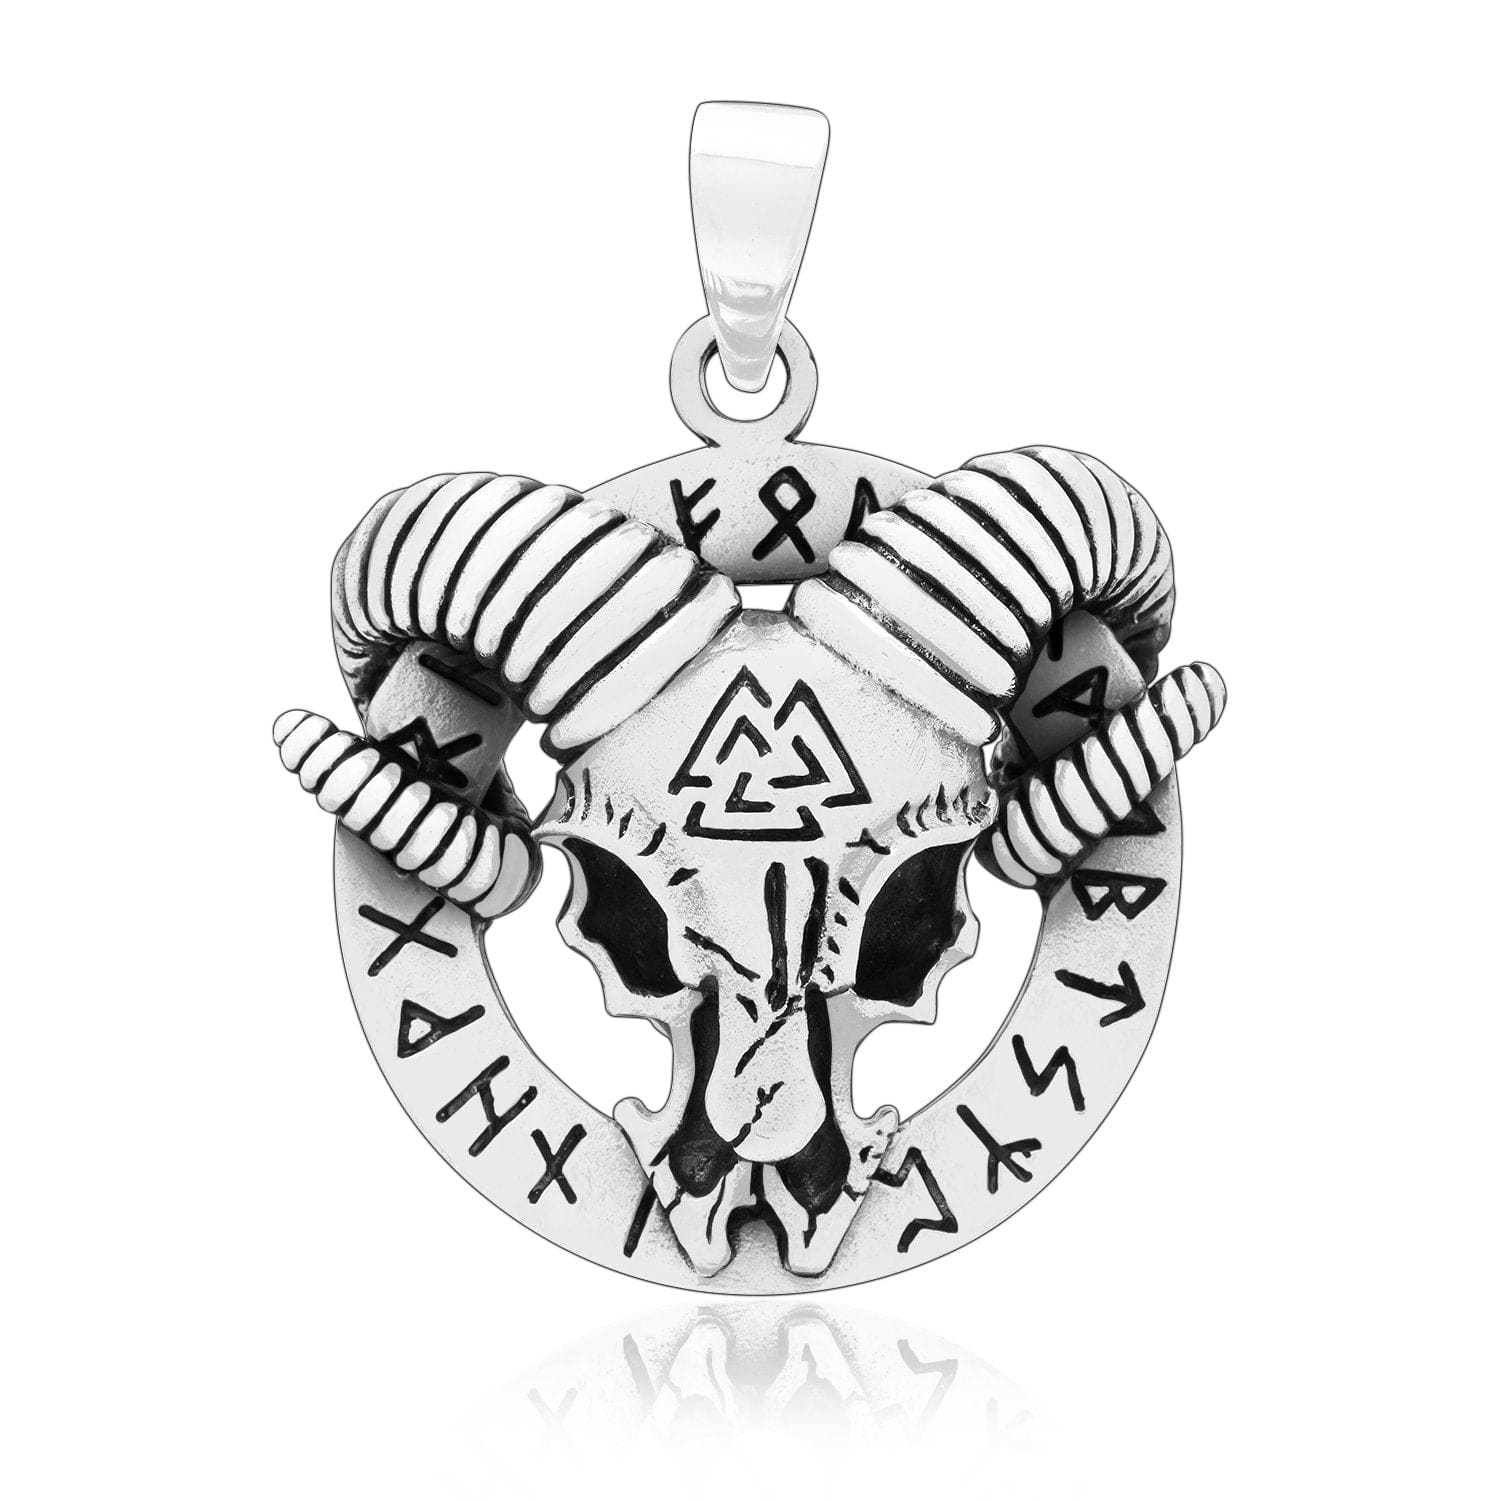 925 Sterling Silver Goat Head Pendant With Valknut and Runes-Viking Necklace-Norse Spirit